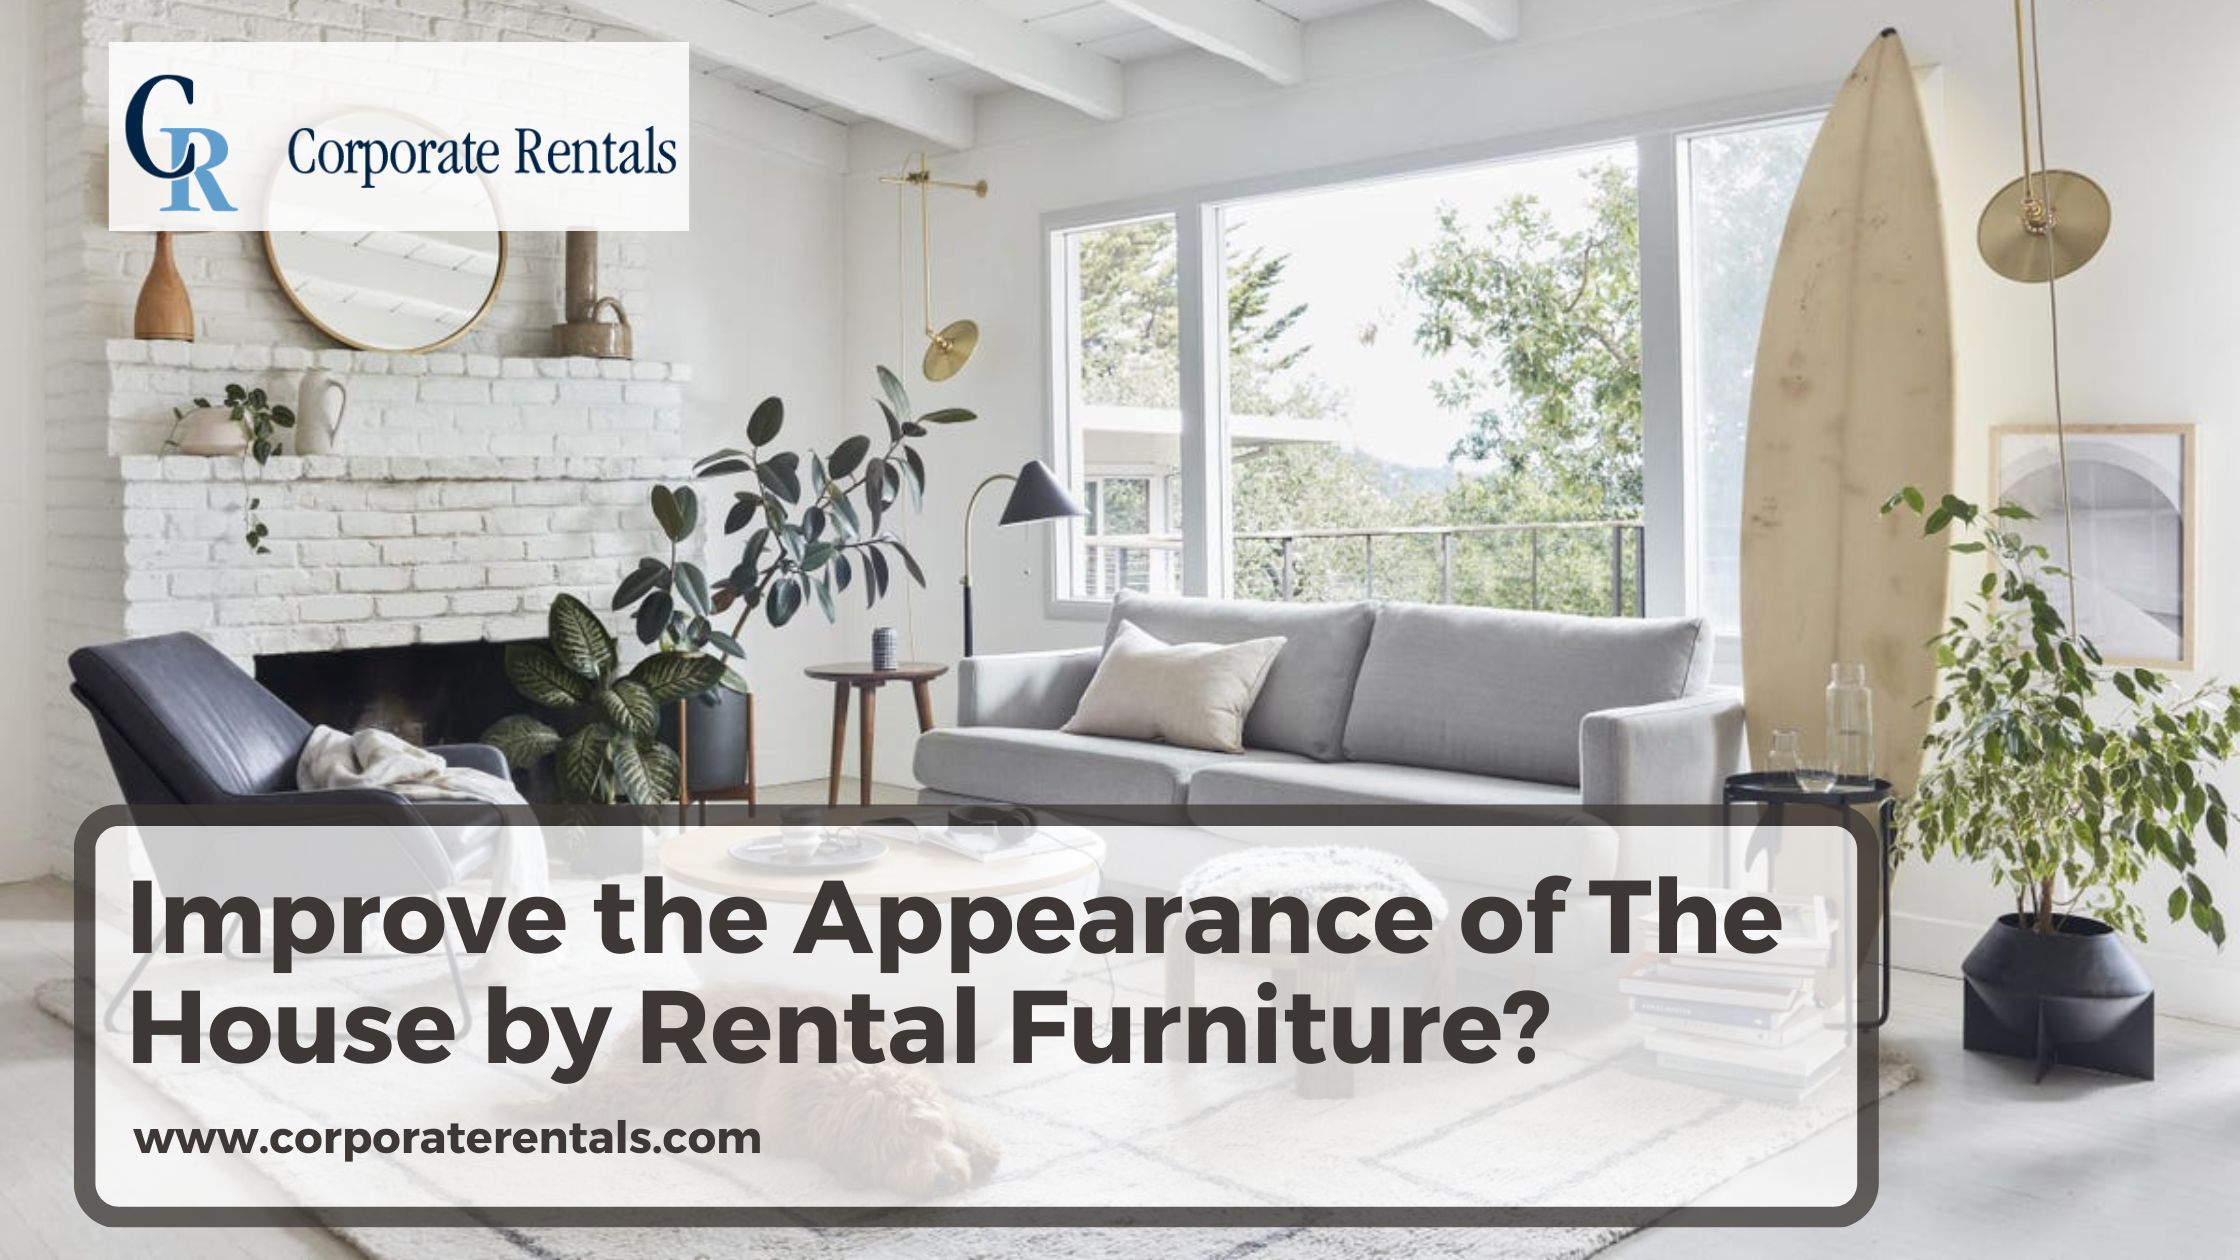 Improve The Appearance of The House by Rental Furniture?